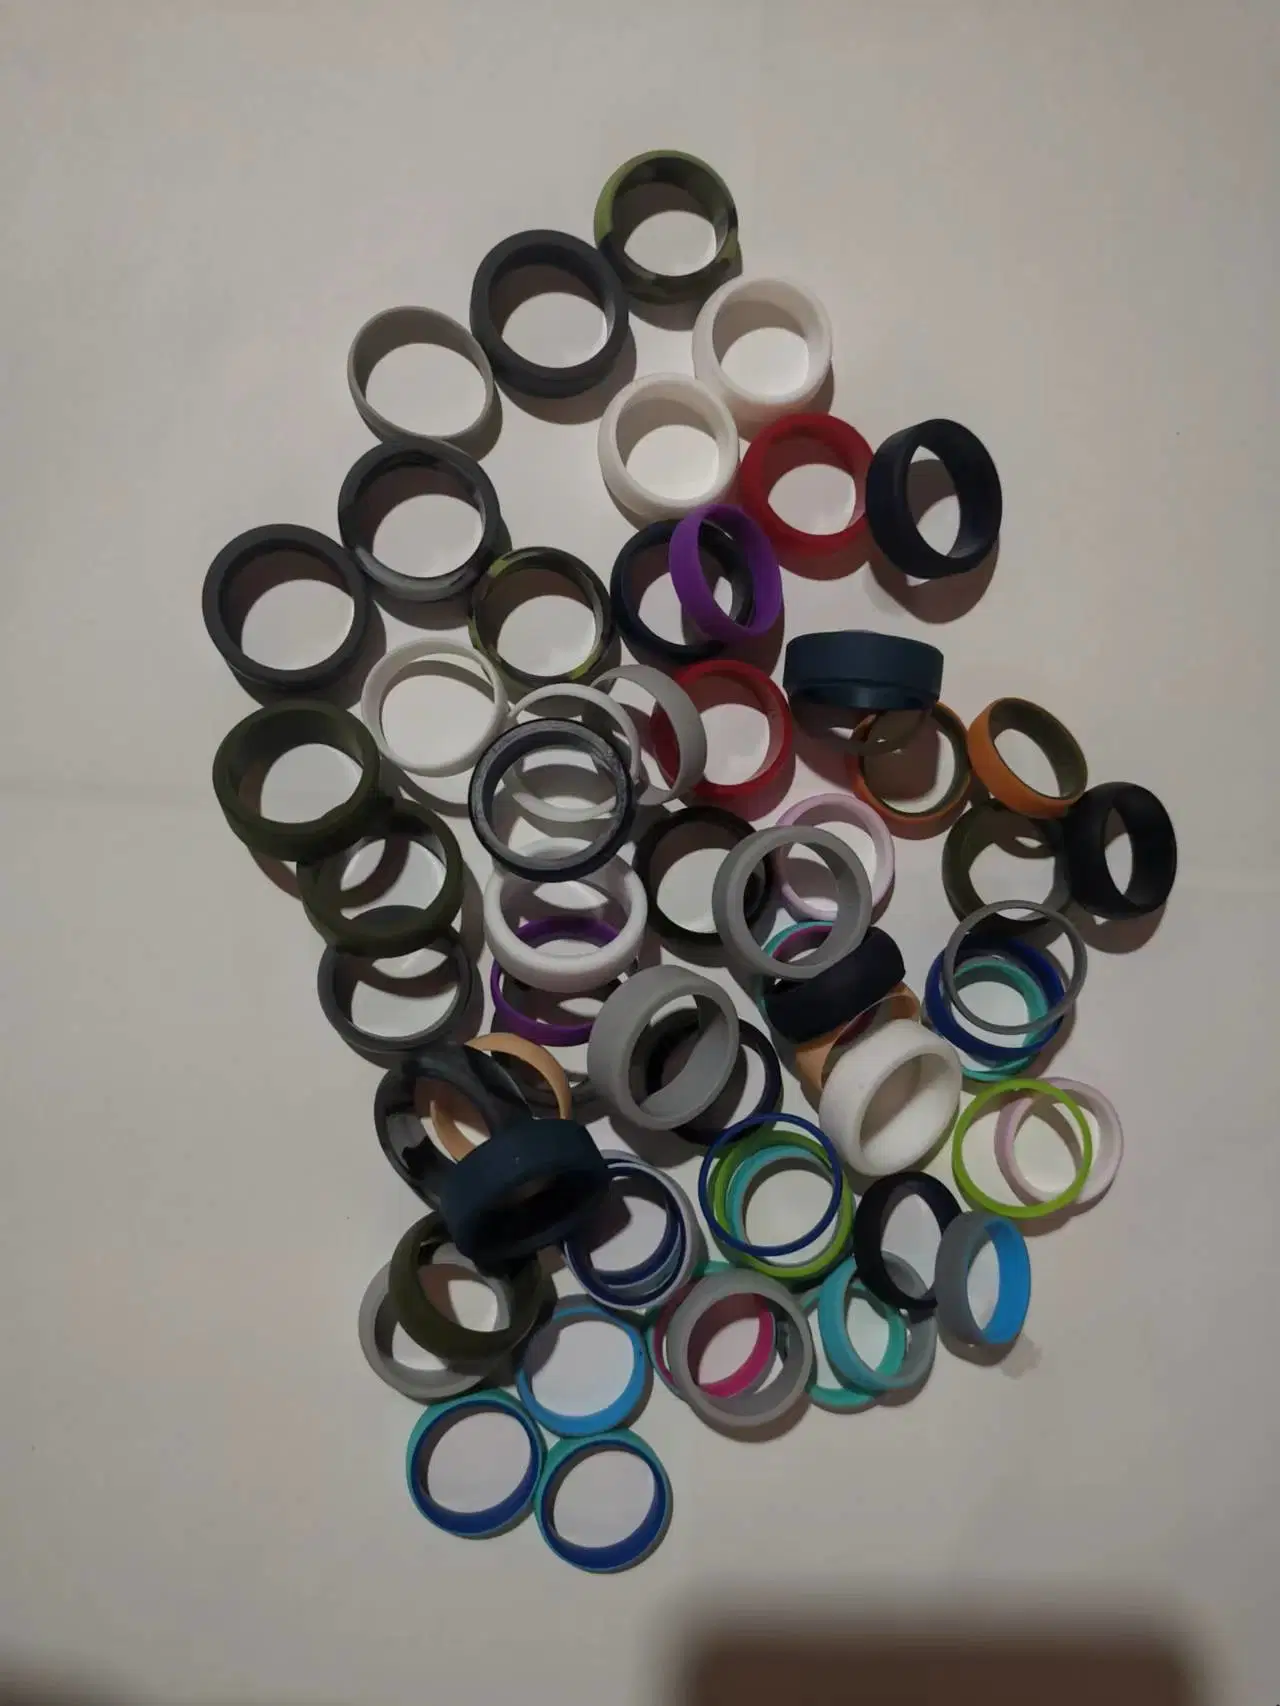 11mm-23mm Silicone Ring with Pattern